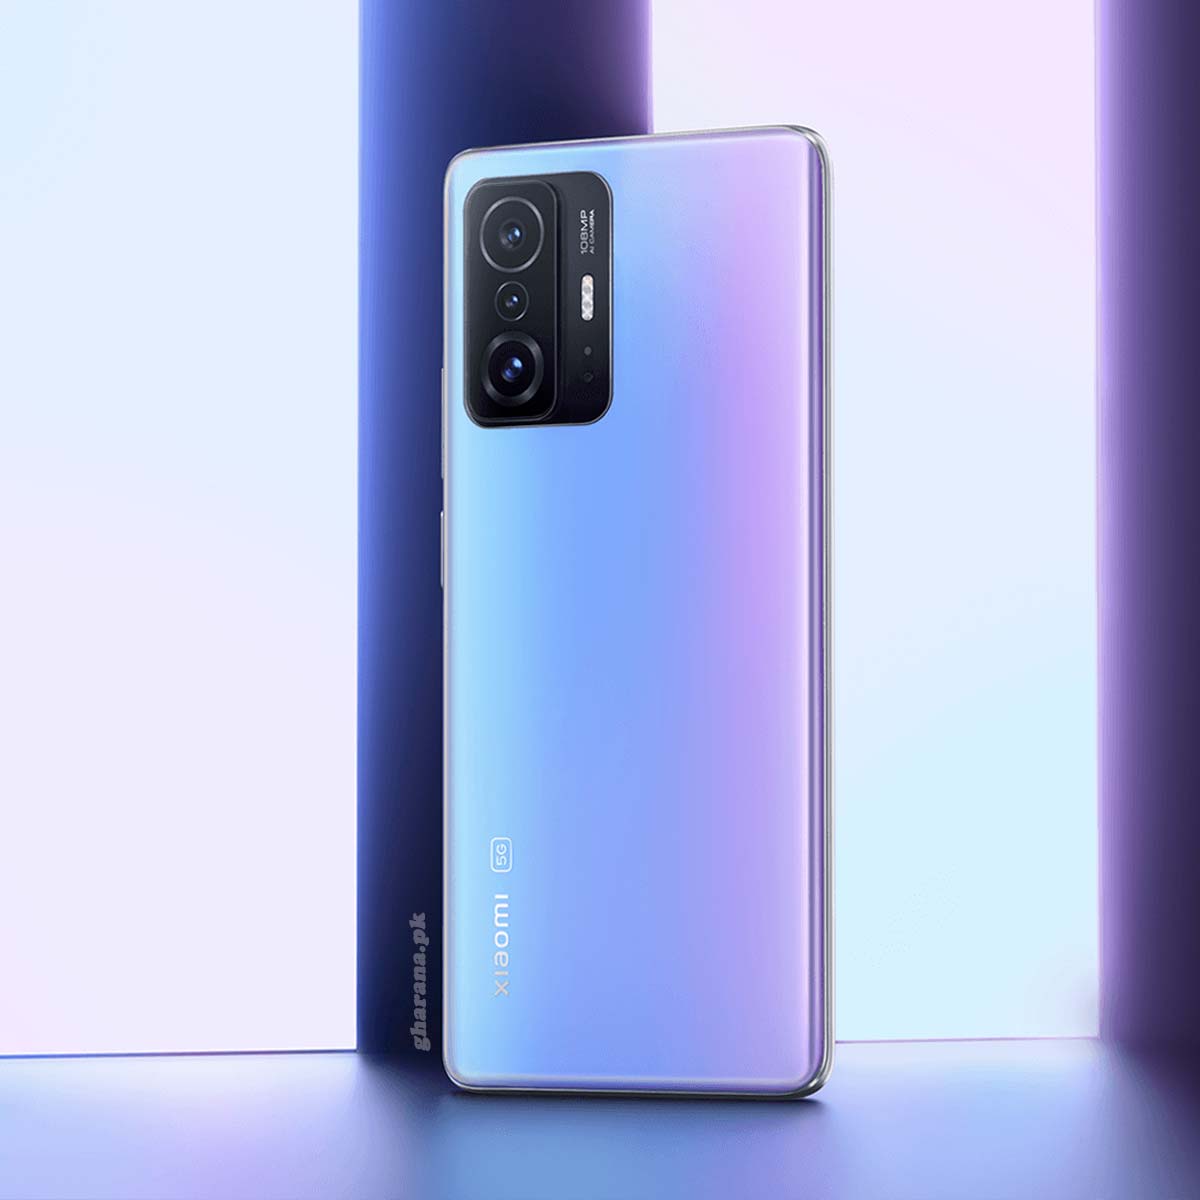 Xiaomi 11T Pro - Full phone specifications